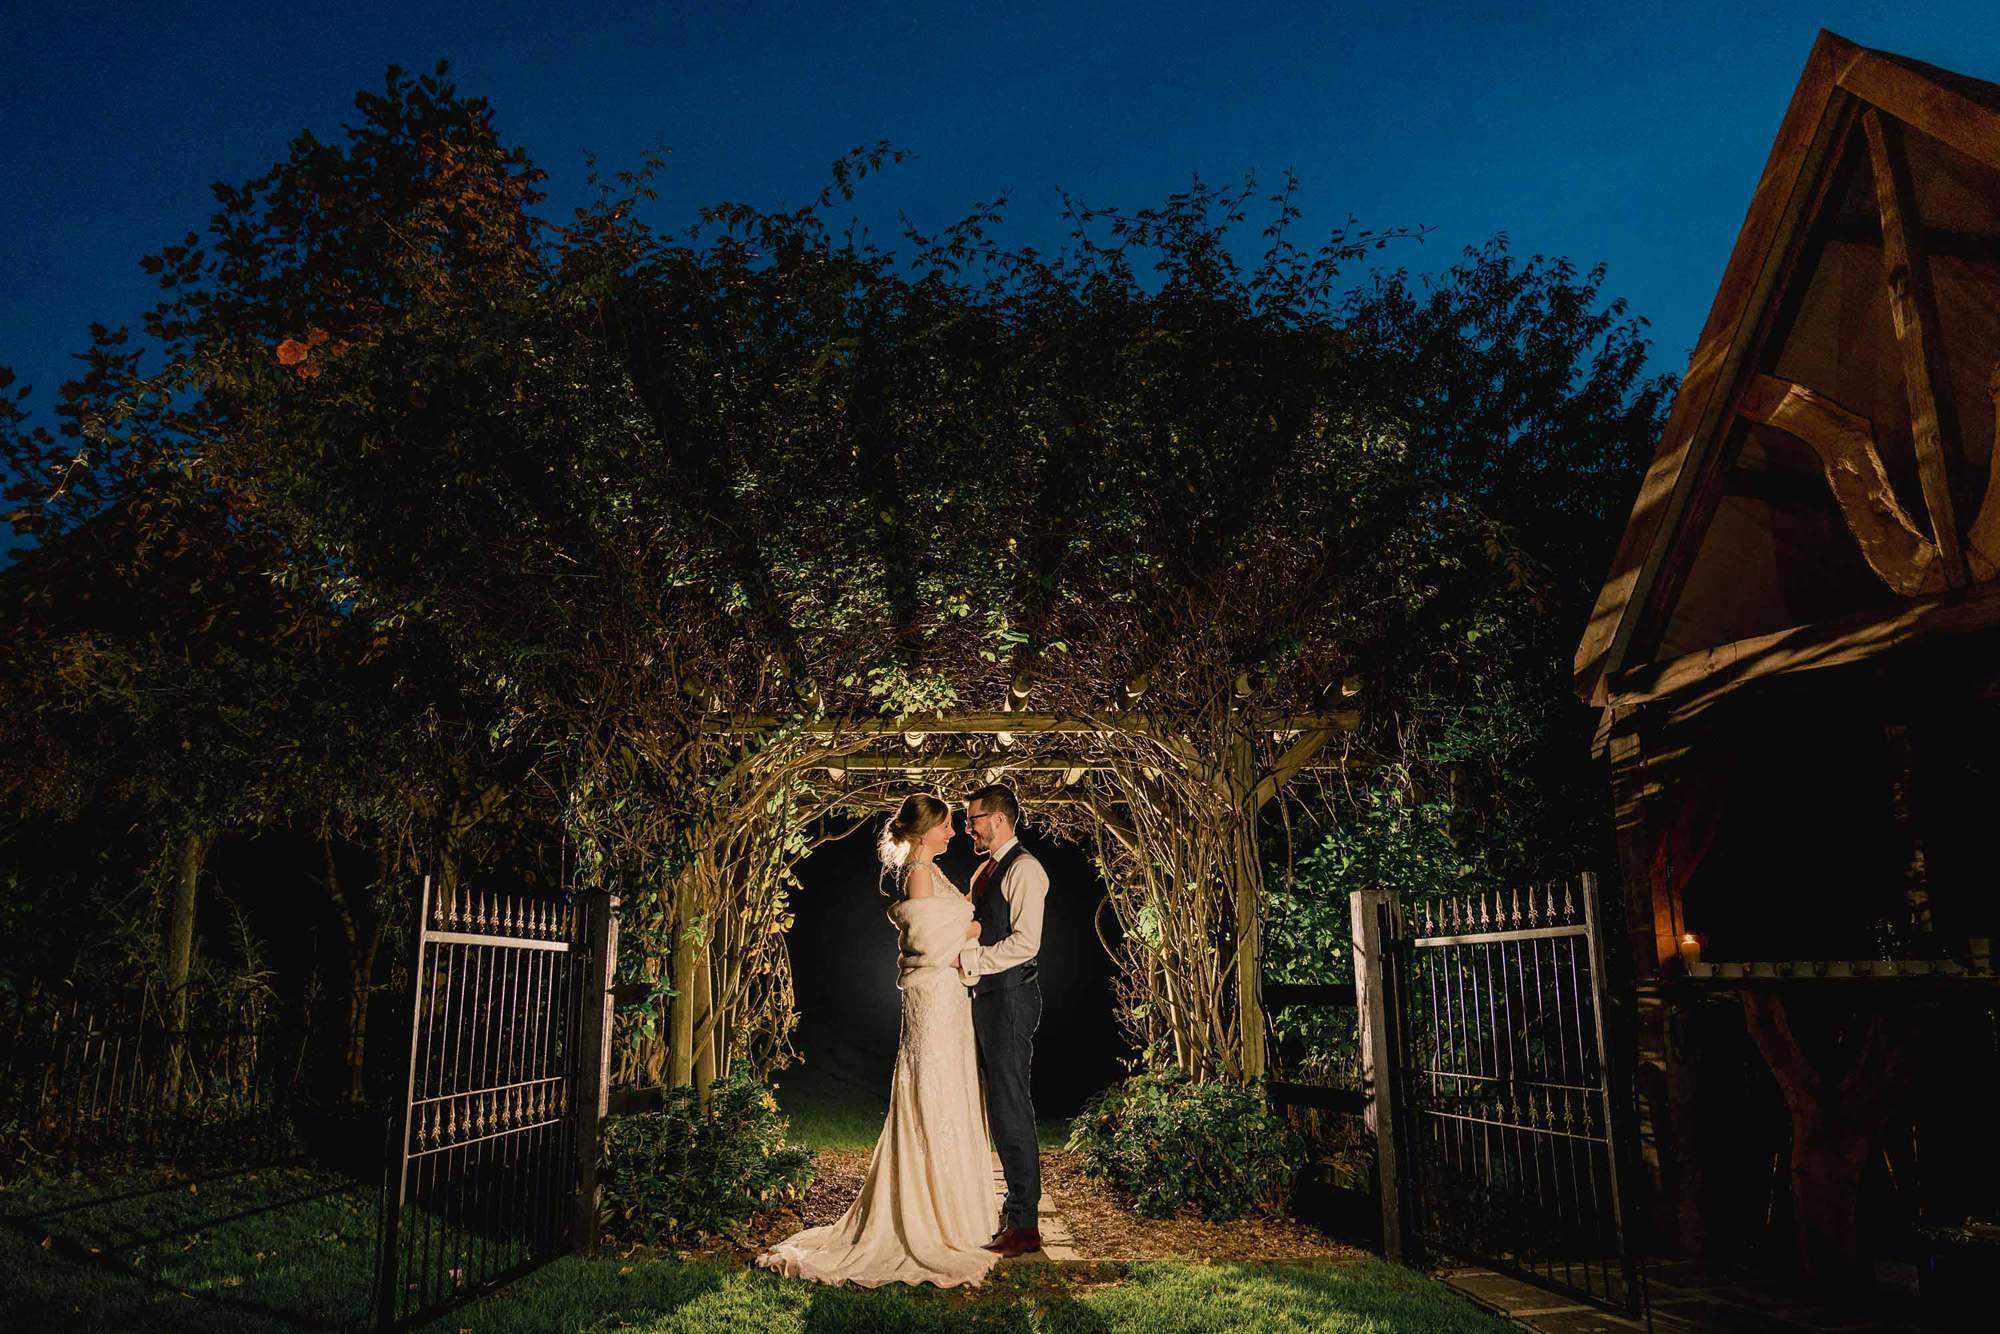 Bride and groom cuddle under a twilight sky at Rumbolds Farm in Billingshurst.